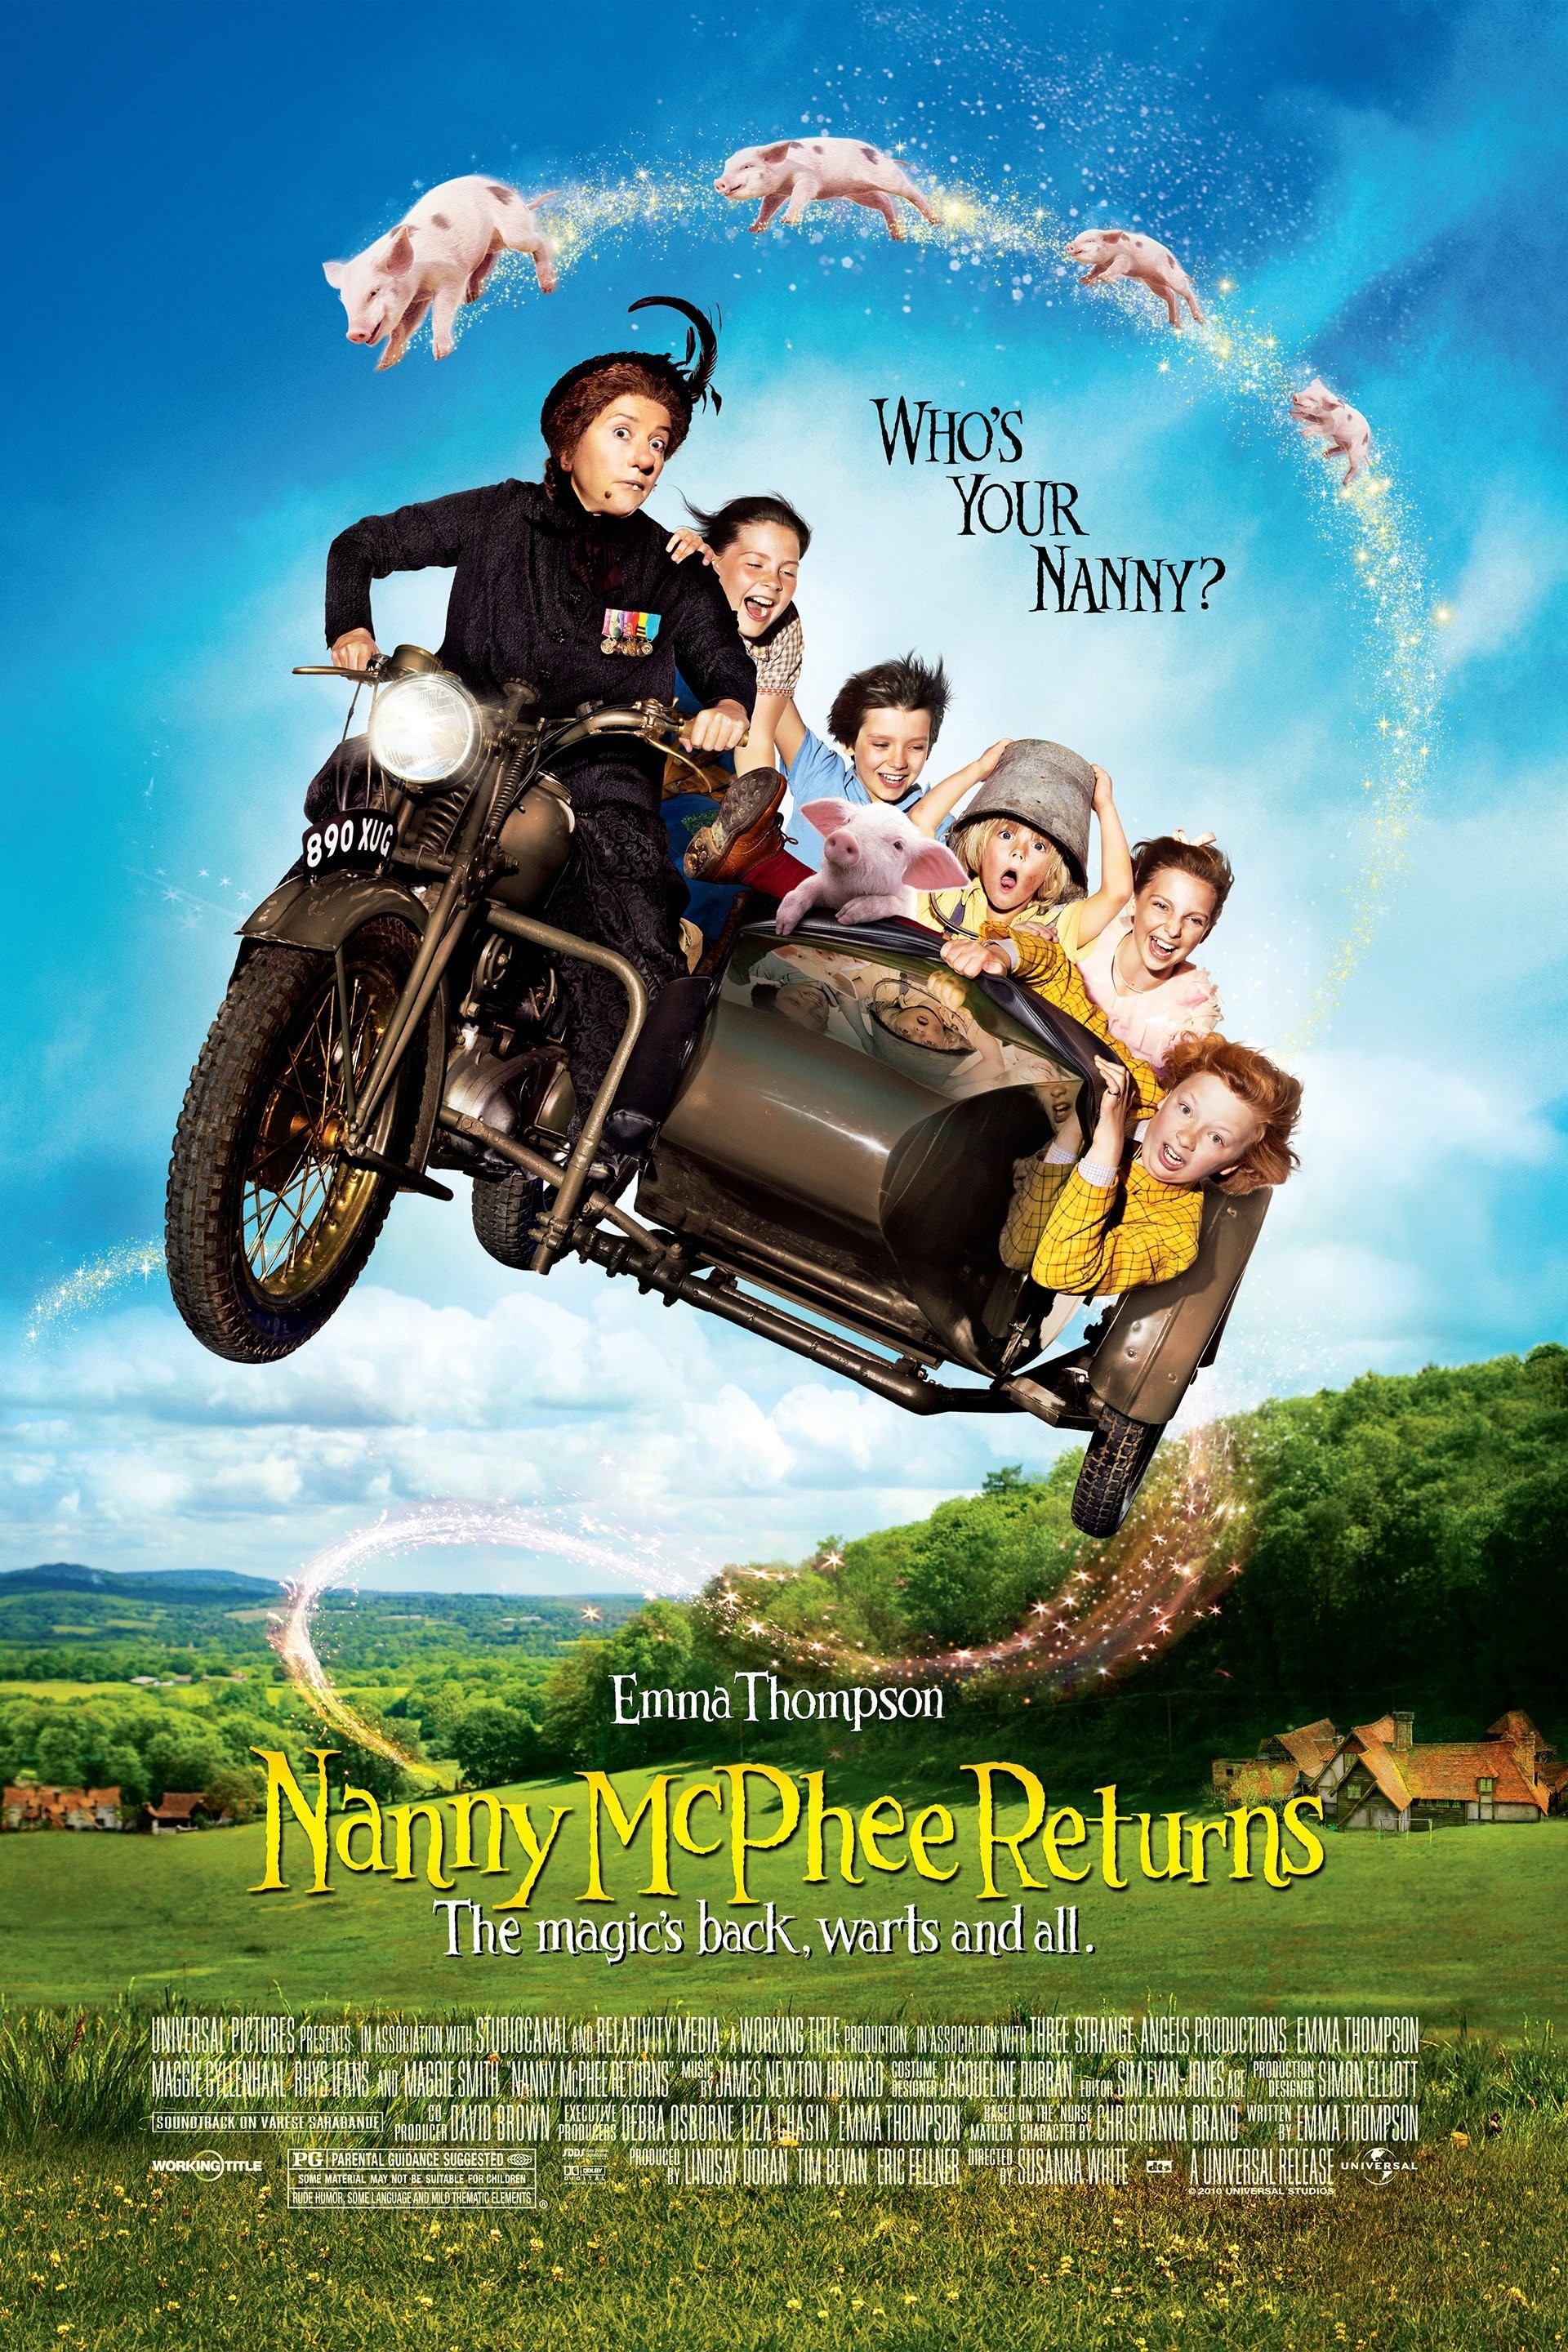 When did Nanny McPhee 4 come out?